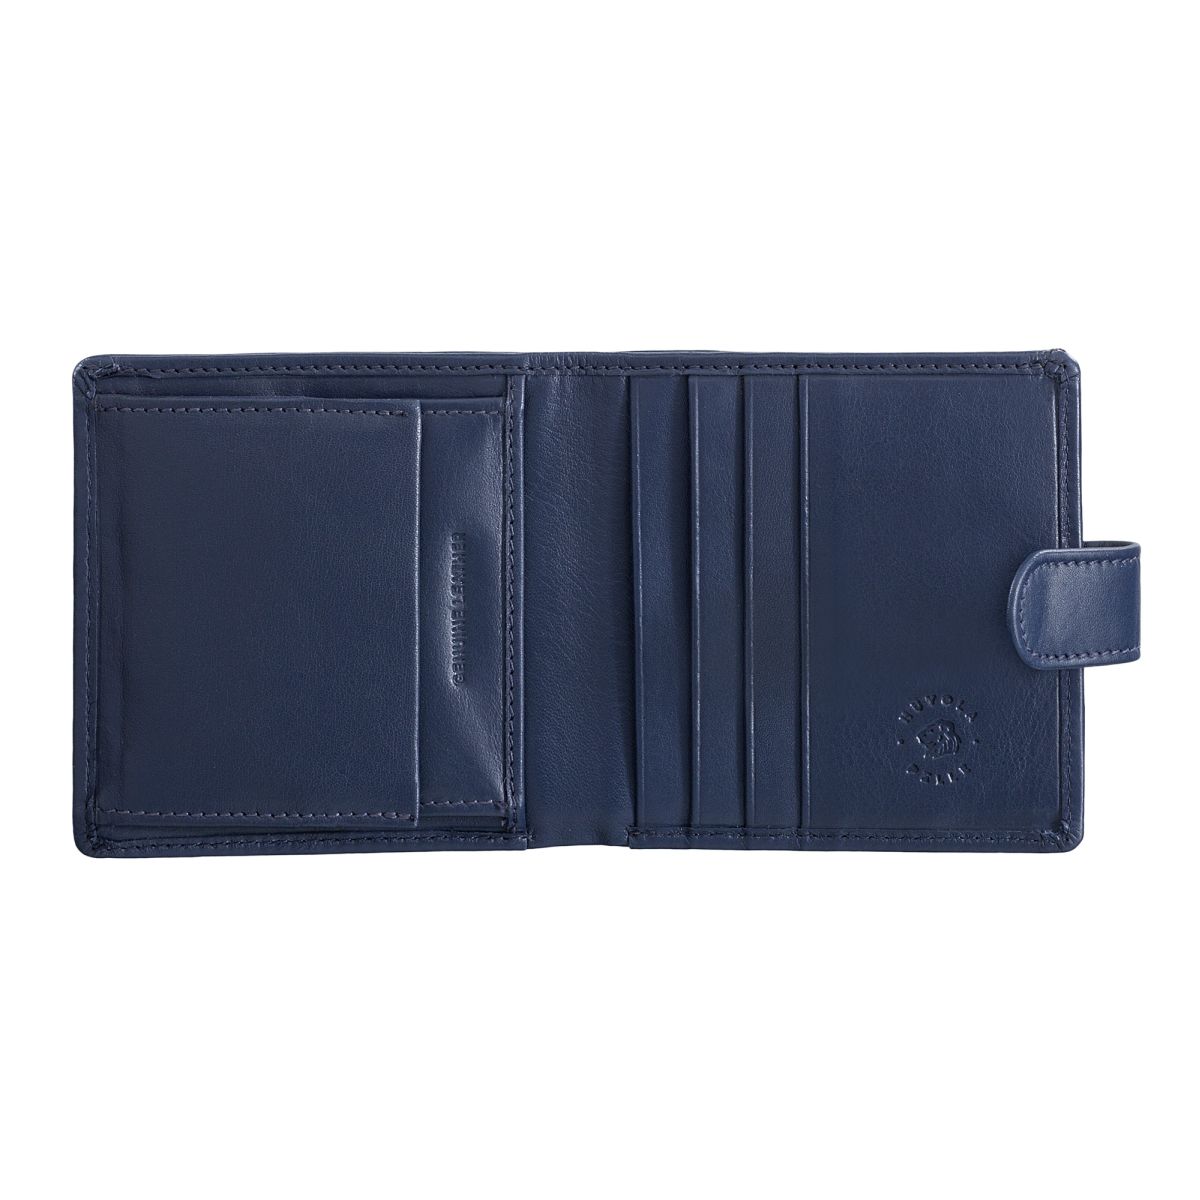 Small mens wallet with coin pocket - Blue